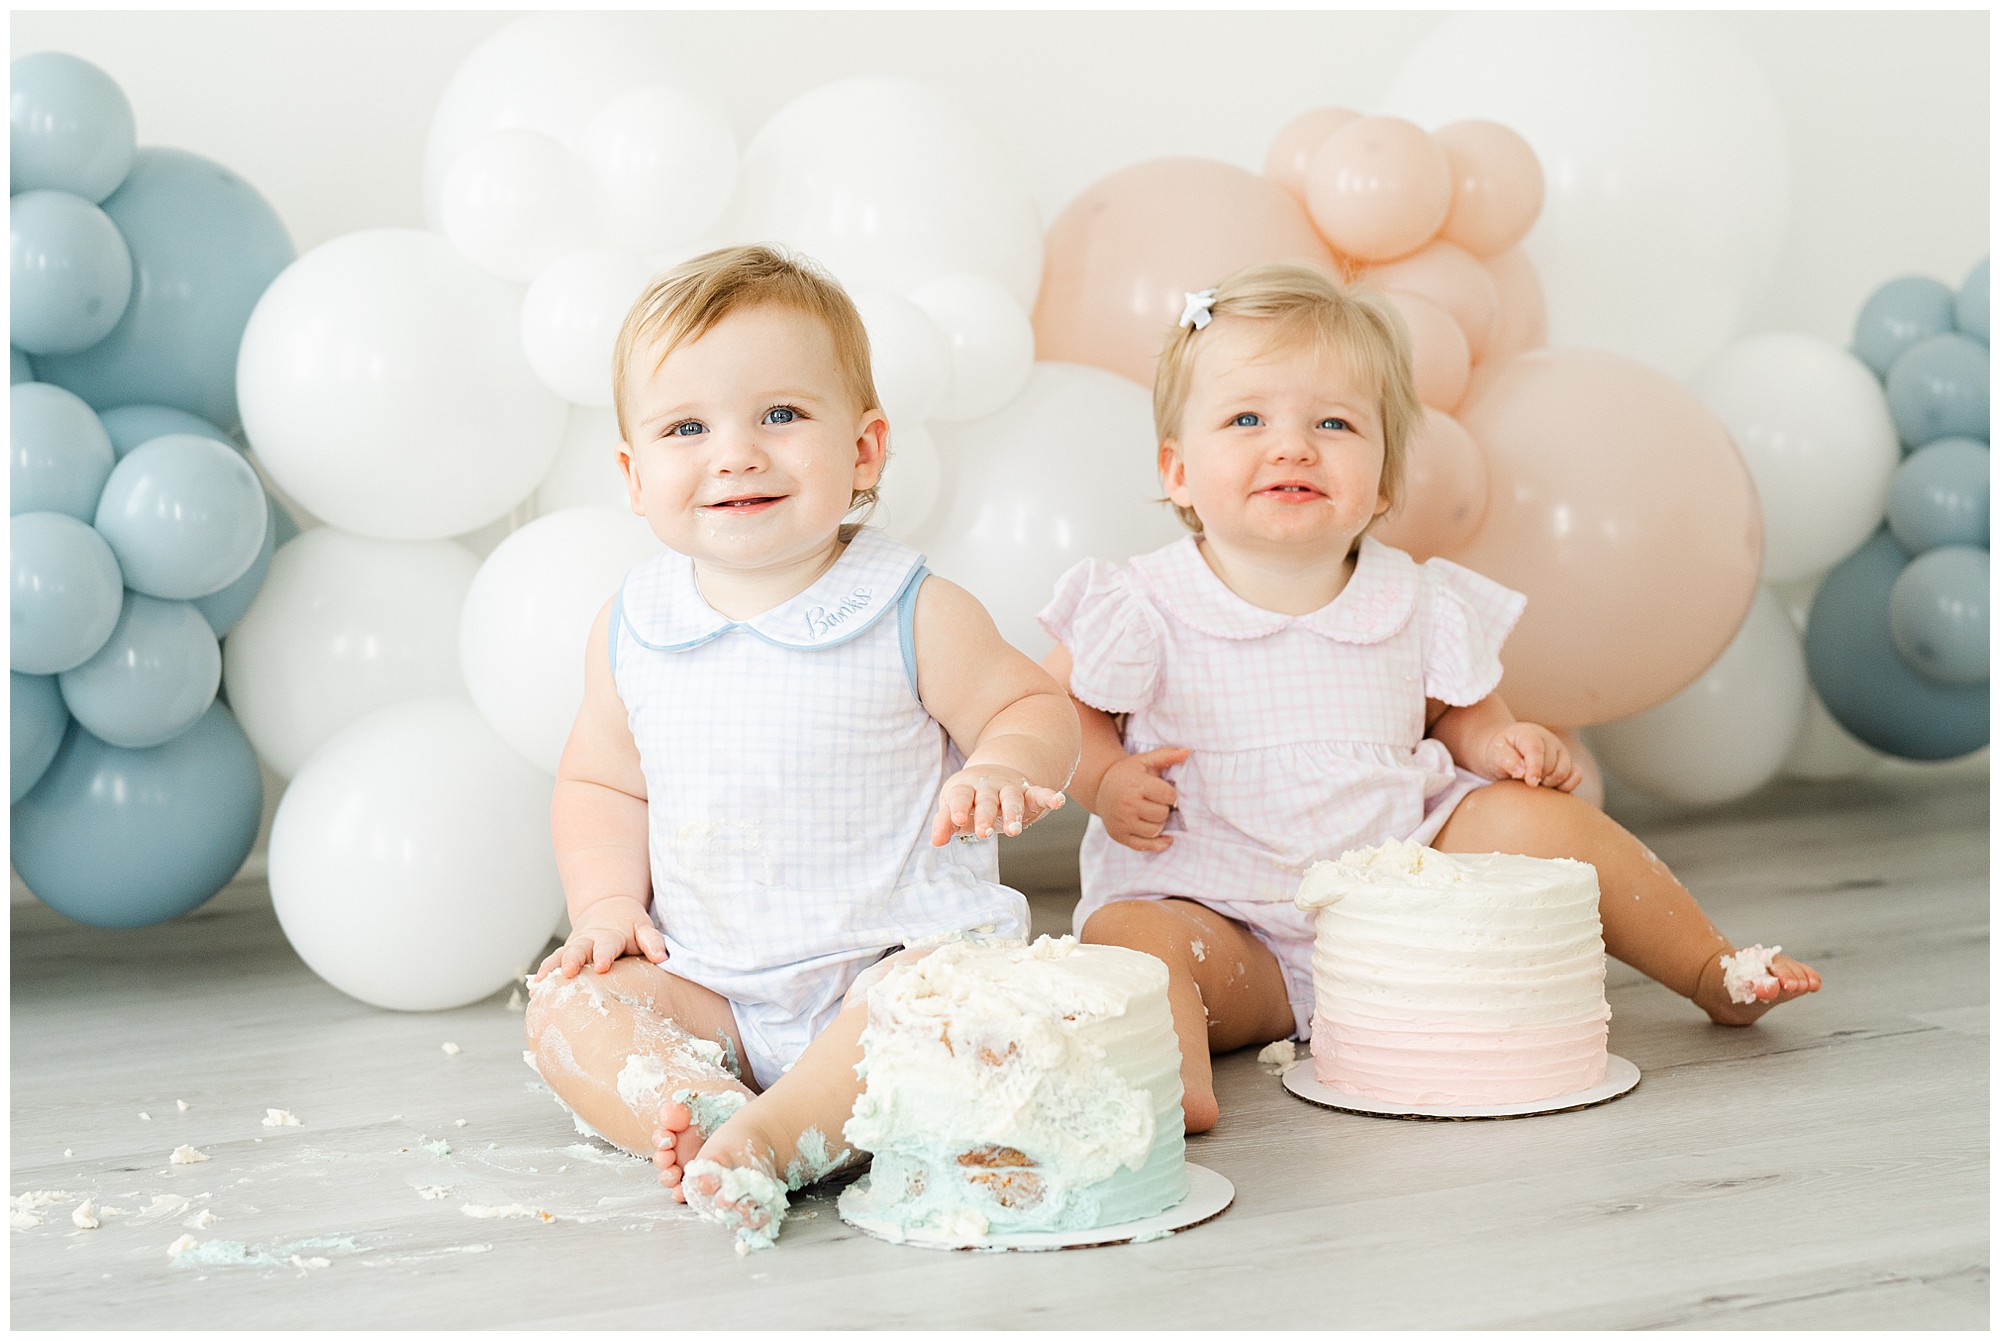 A twin boy and girl digging into cakes for an Atlanta cake smash for twins photo session.